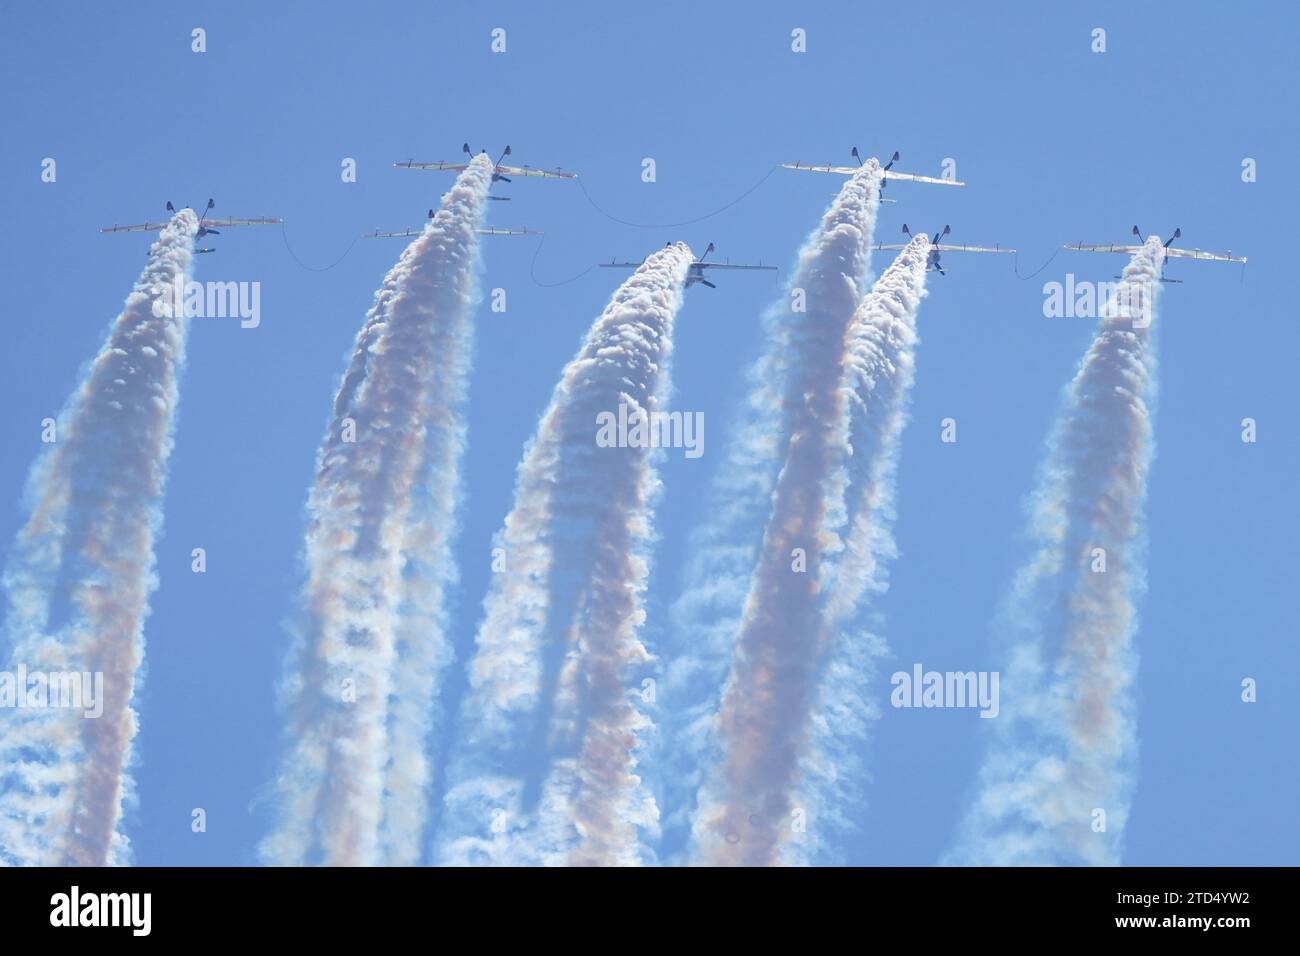 ISTANBUL, TURKIYE - MAY 01, 2023: Moroccan Marche Verte - Green March aerobatic demonstration team display in Istanbul Ataturk Airport during Teknofes Stock Photo